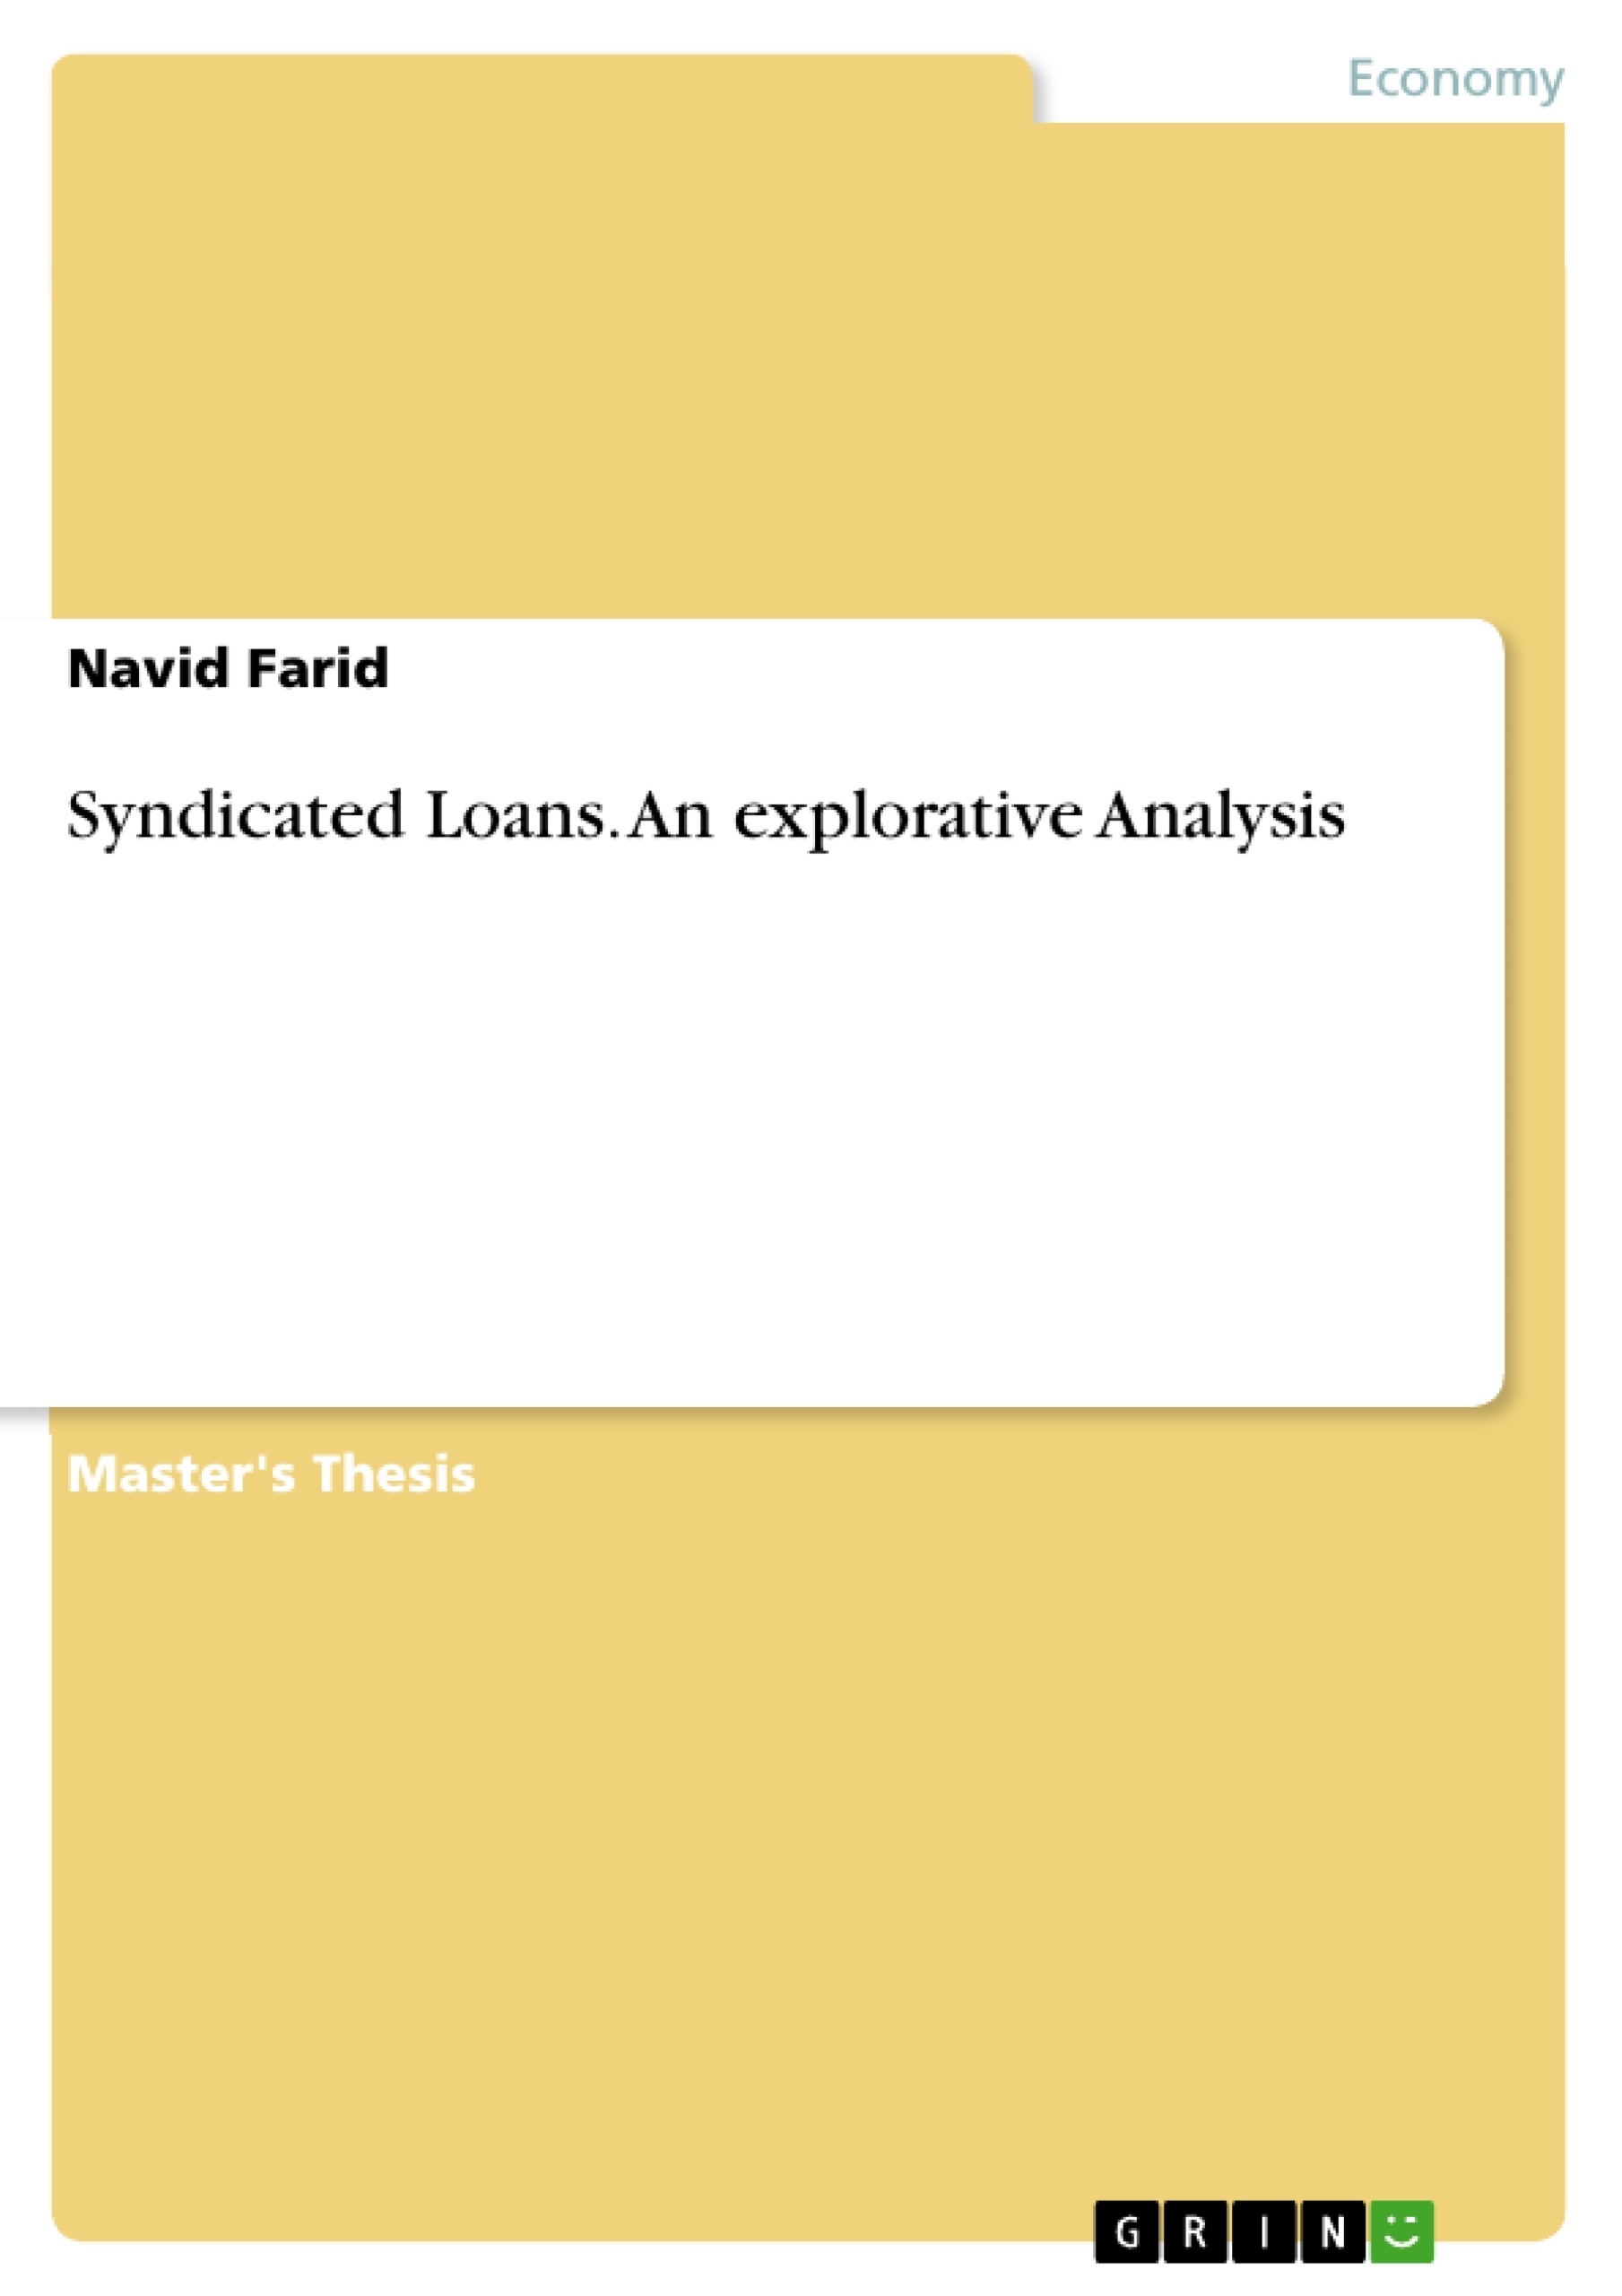 Title: Syndicated Loans. An explorative Analysis